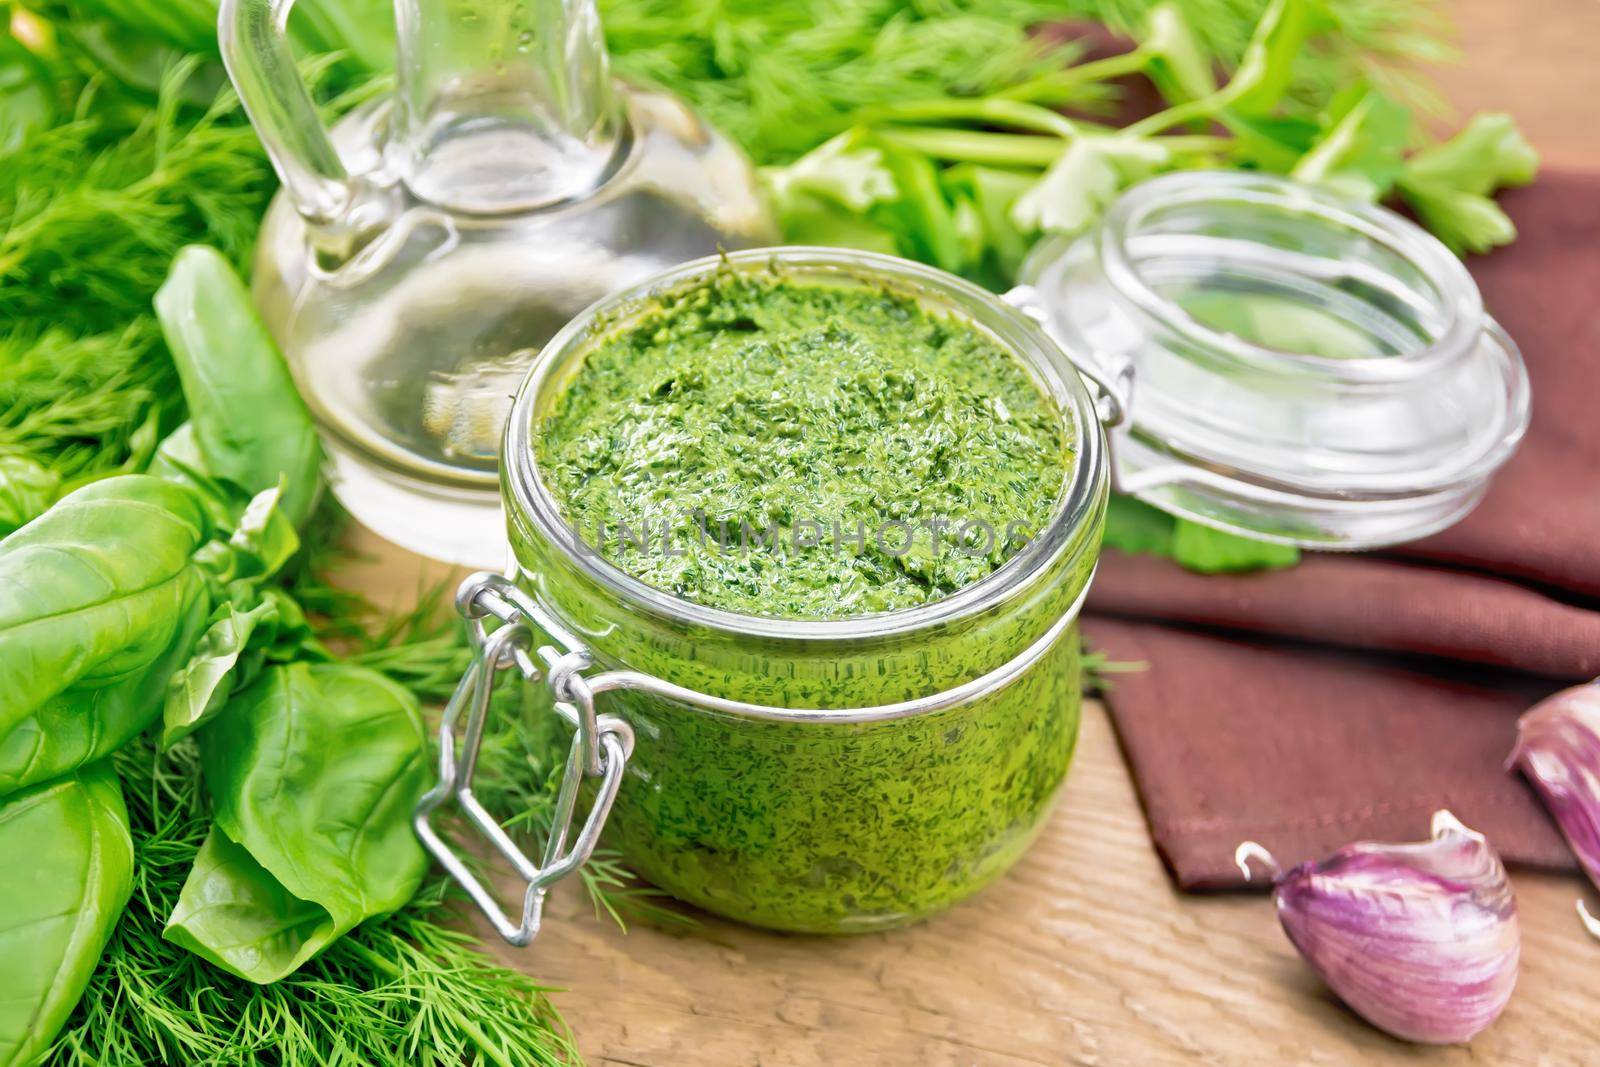 Sauce of dill, parsley, basil, cilantro, other spicy herbs, garlic and vegetable oil in a glass jar, a towel on wooden board background